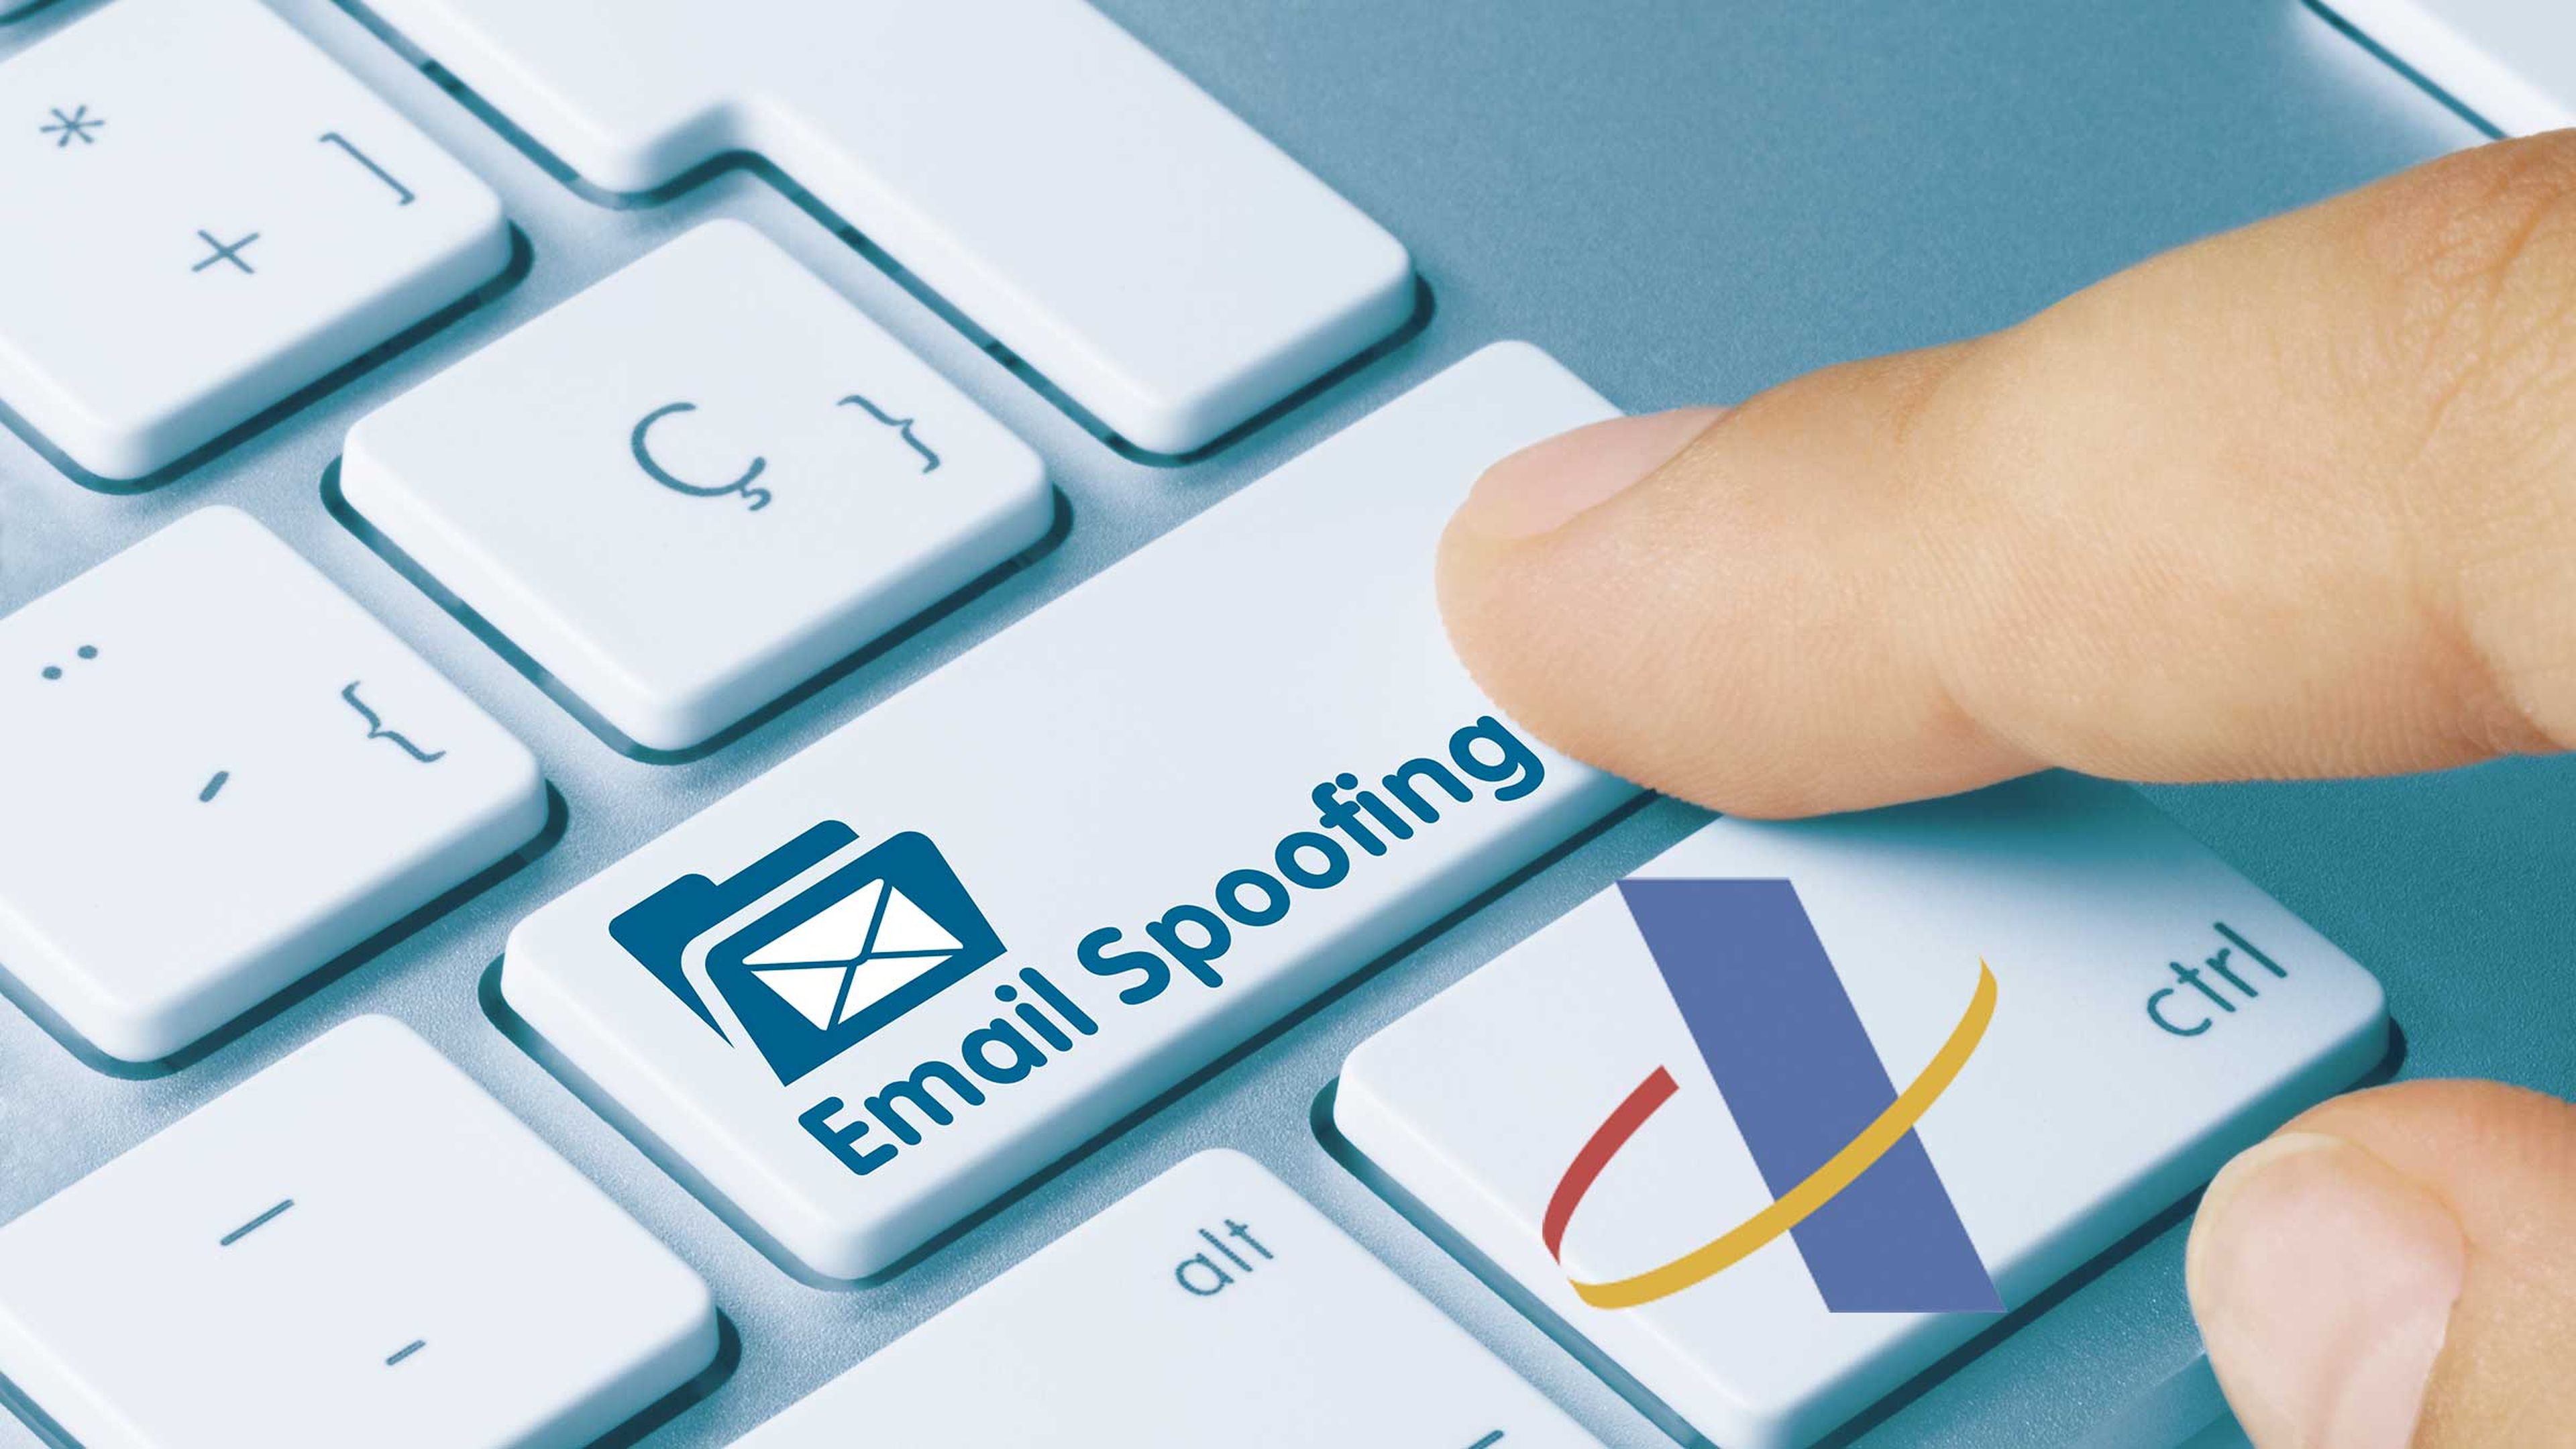 Agencia Tributaria email spoofing